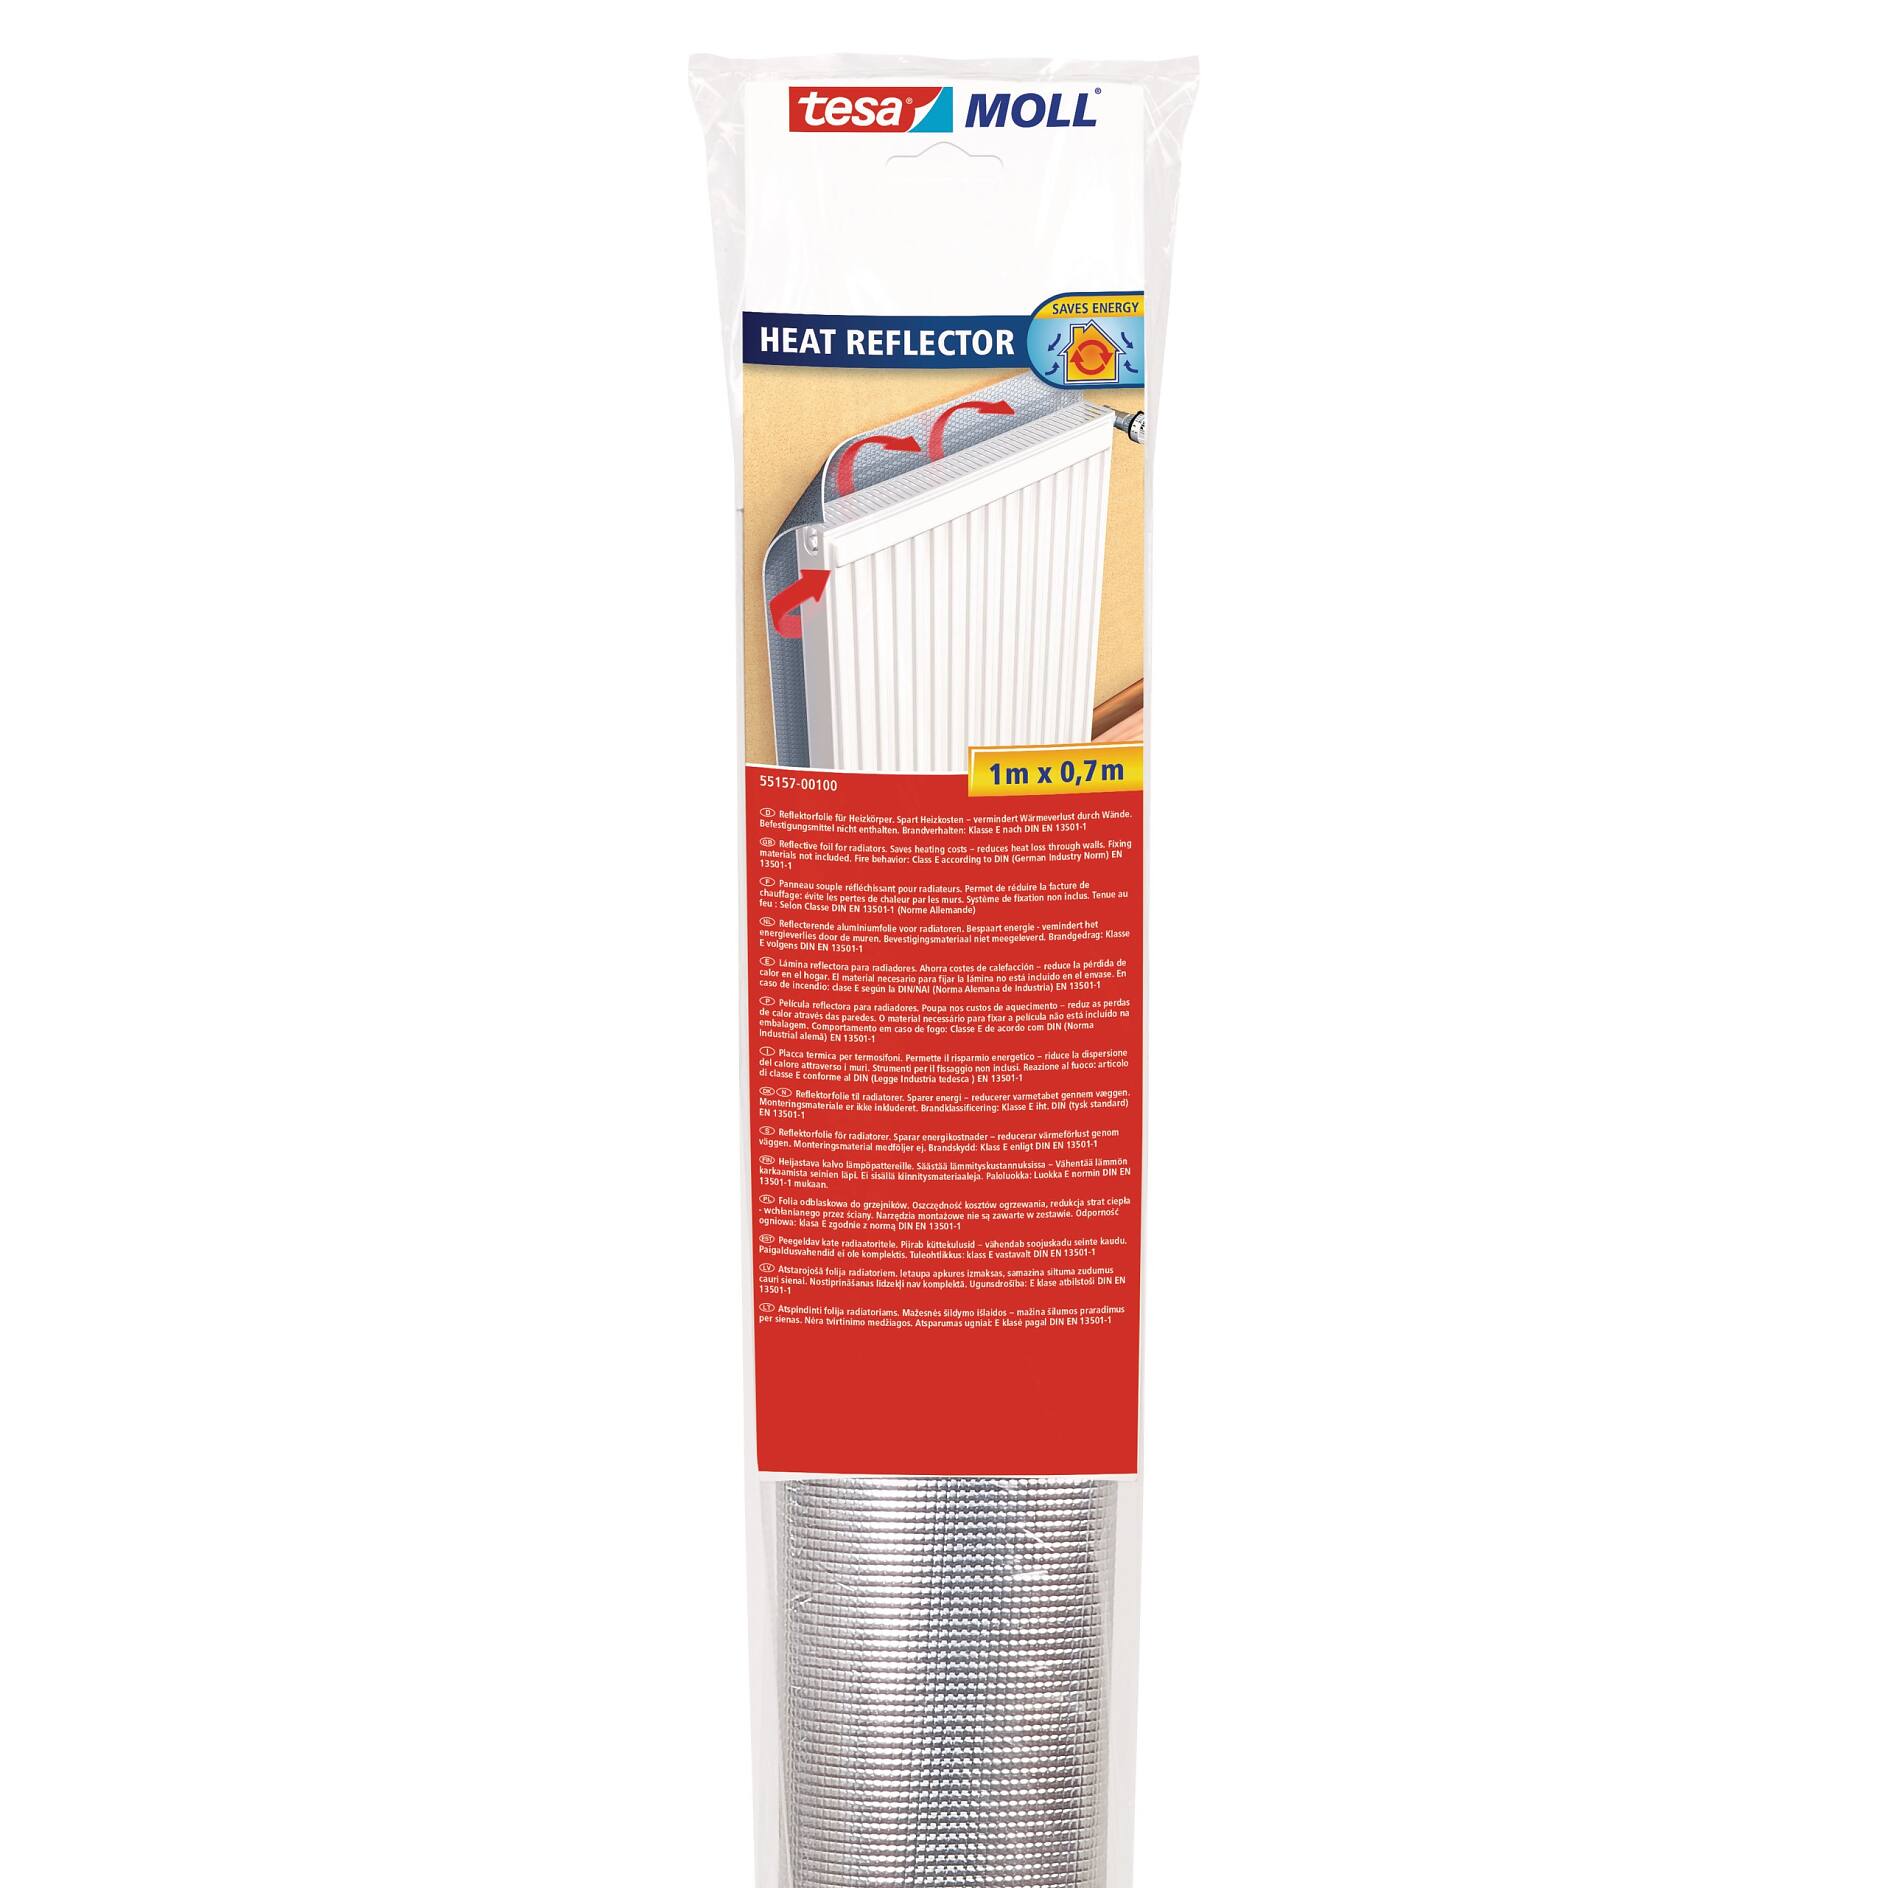 STRMAX Thermo Cover Fenster-Isolierfolie,Isolierte Fensterfolie